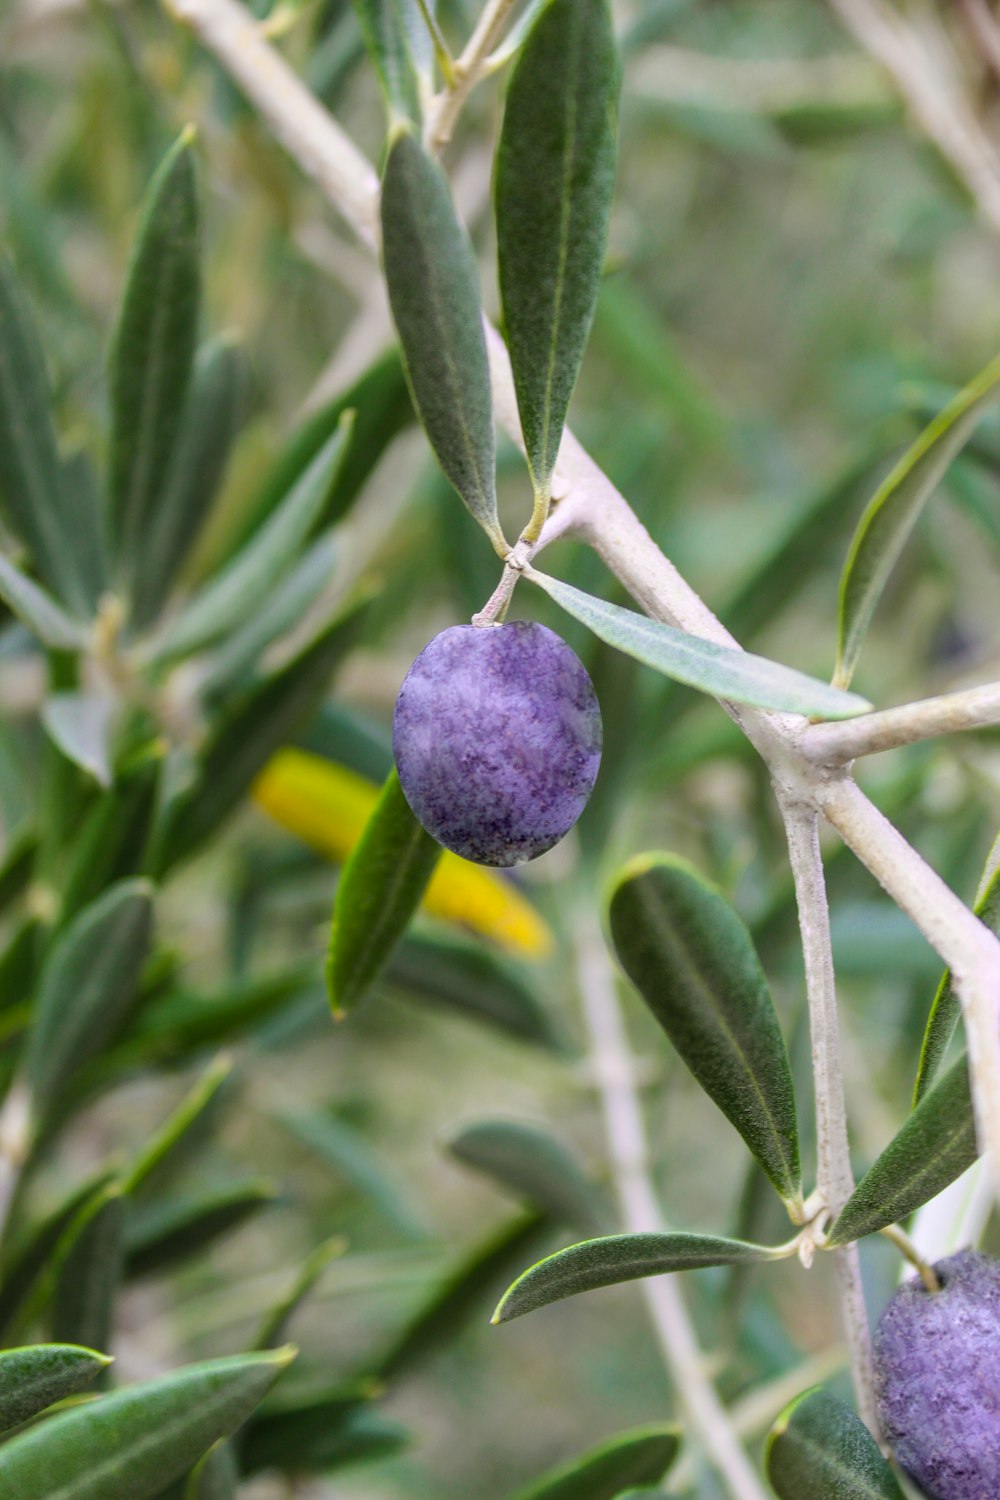 a close up of some olives on a tree